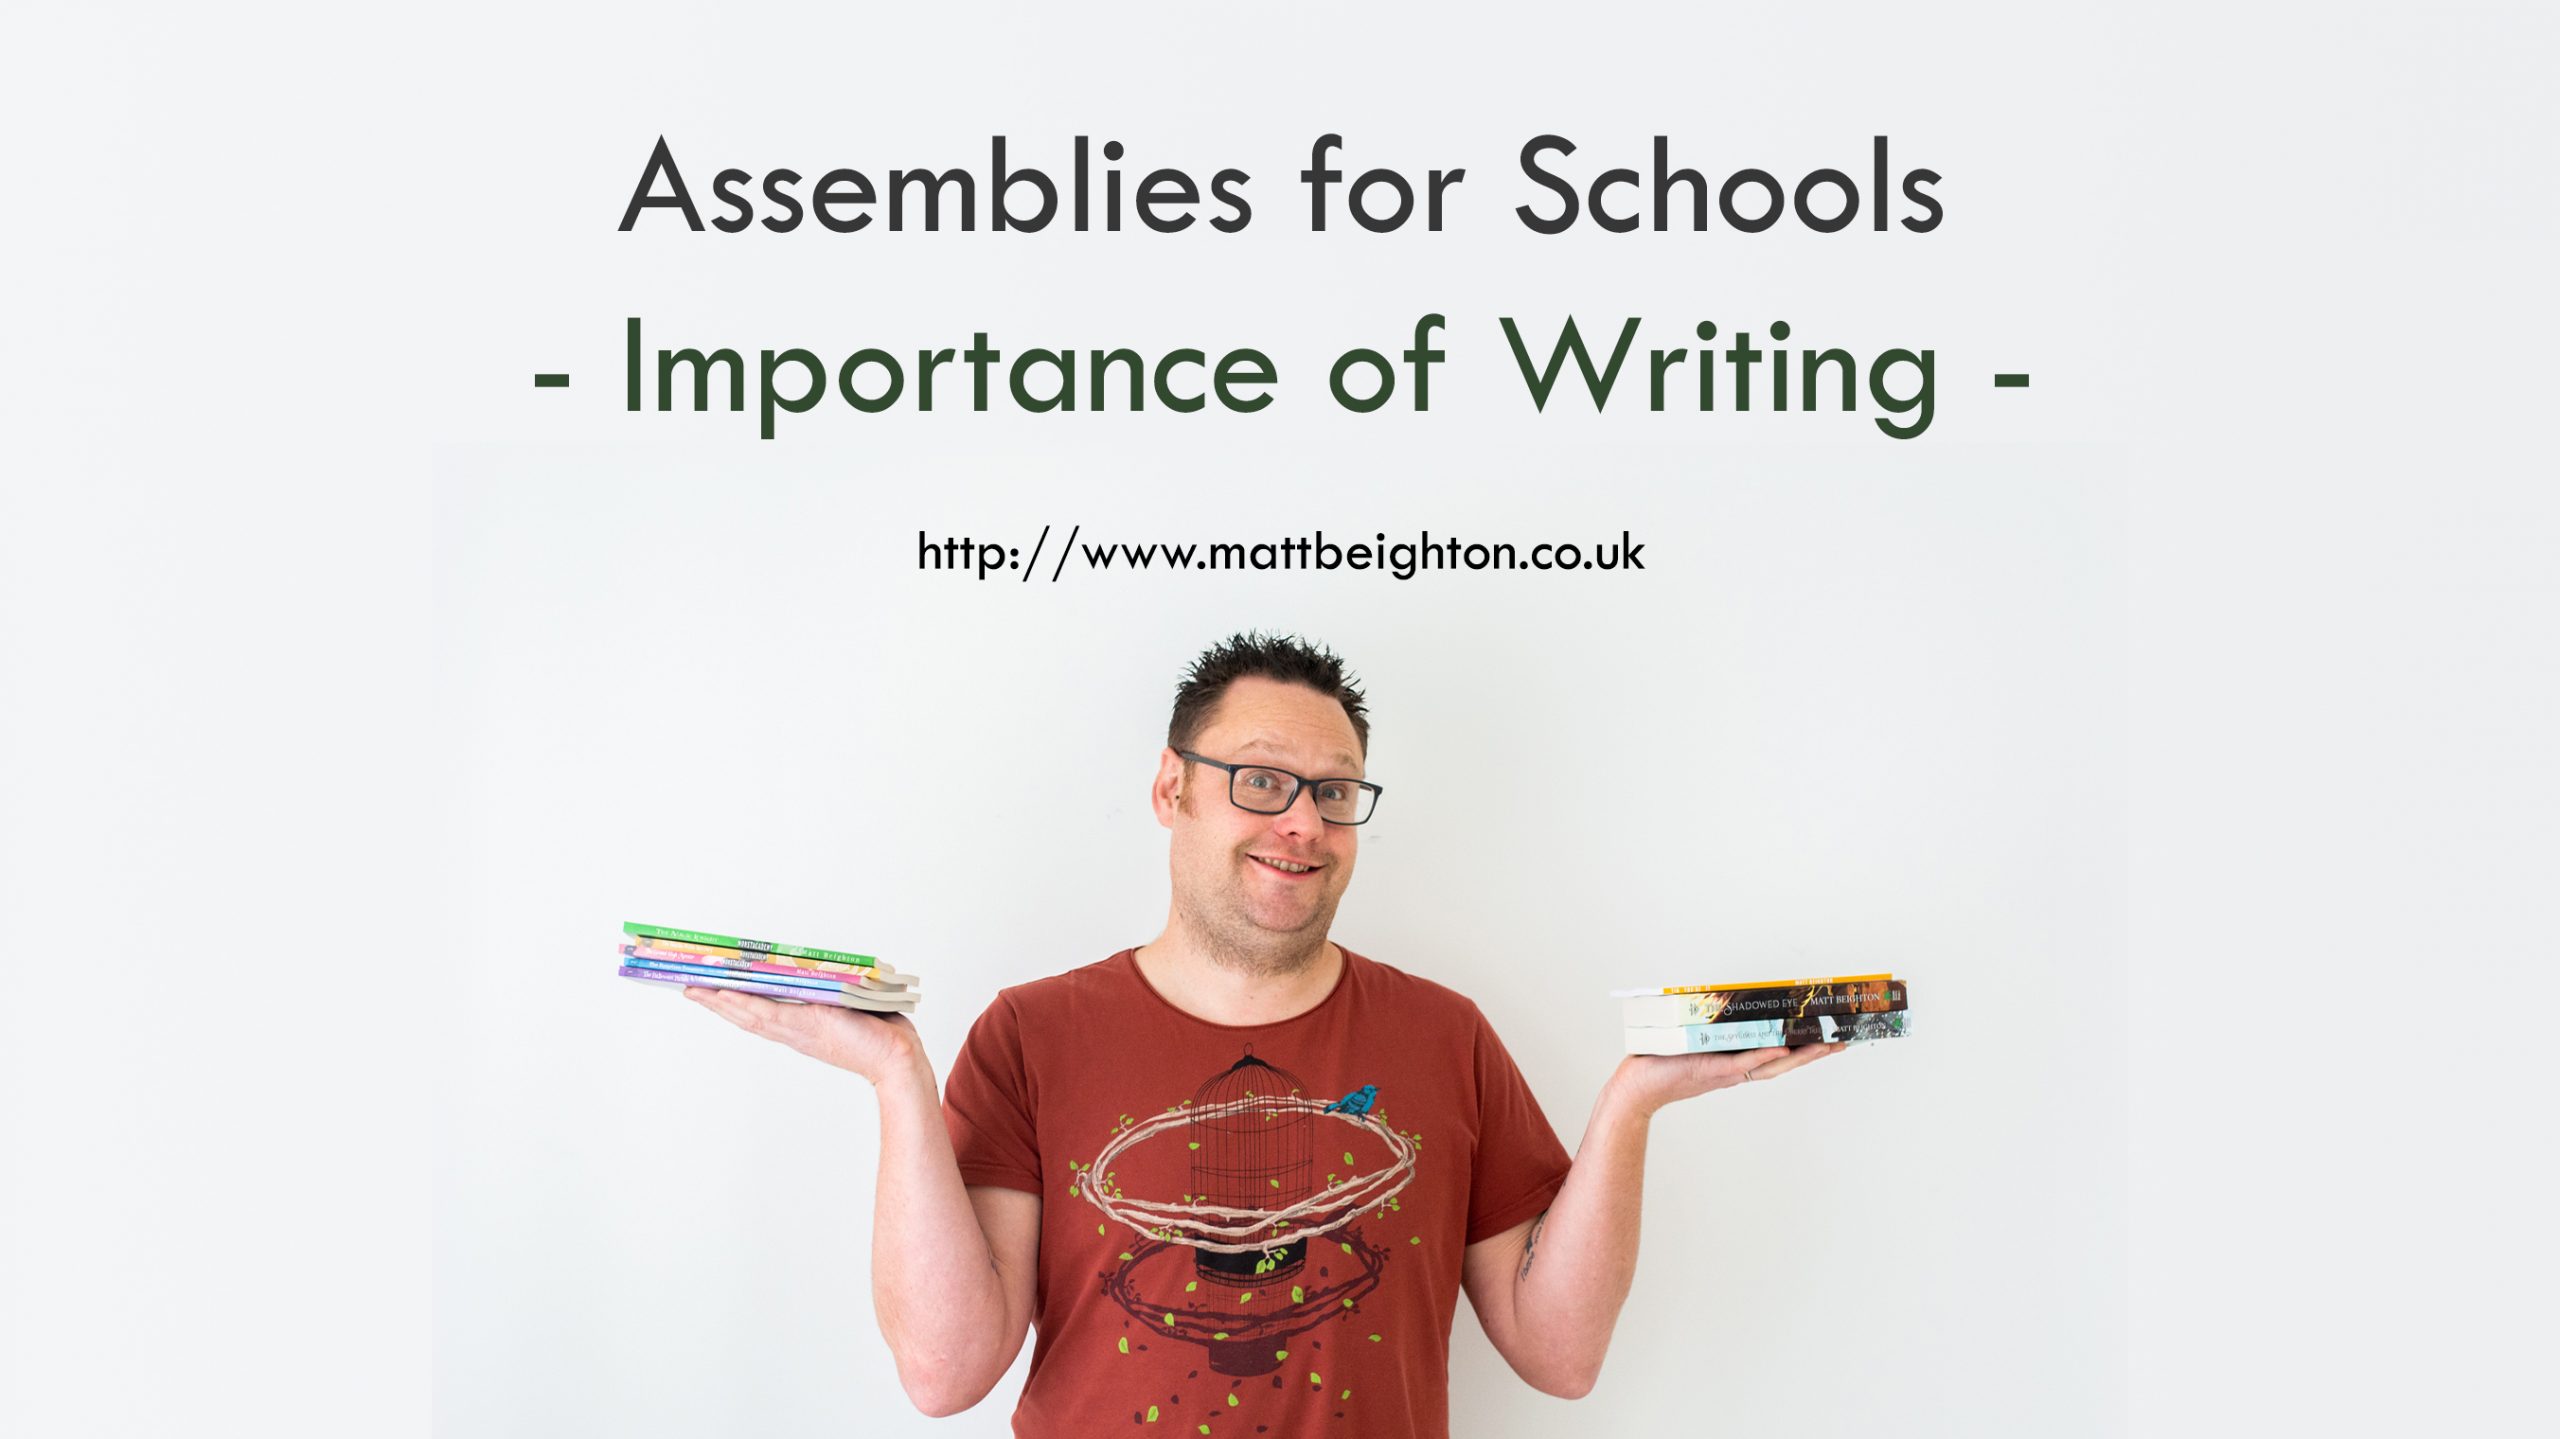 Assemblies for Schools - The importance of writing